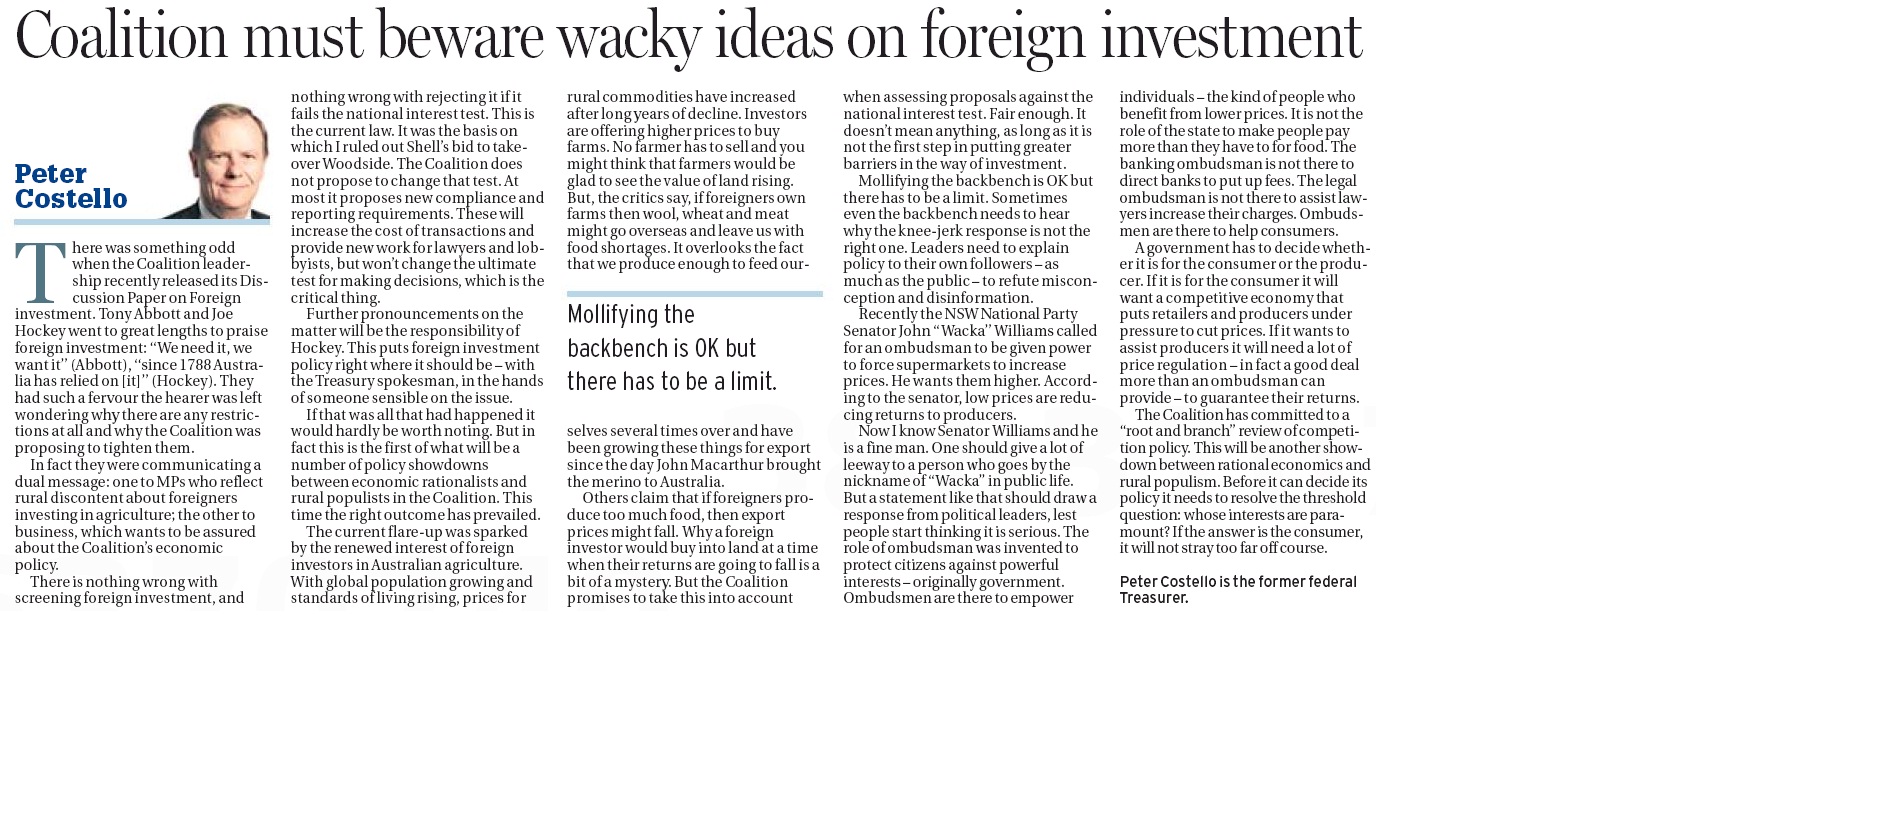 smh_-_coalition_must_beware_wacky_ideas_on_foreign_investment_-_15_august_2012jpg